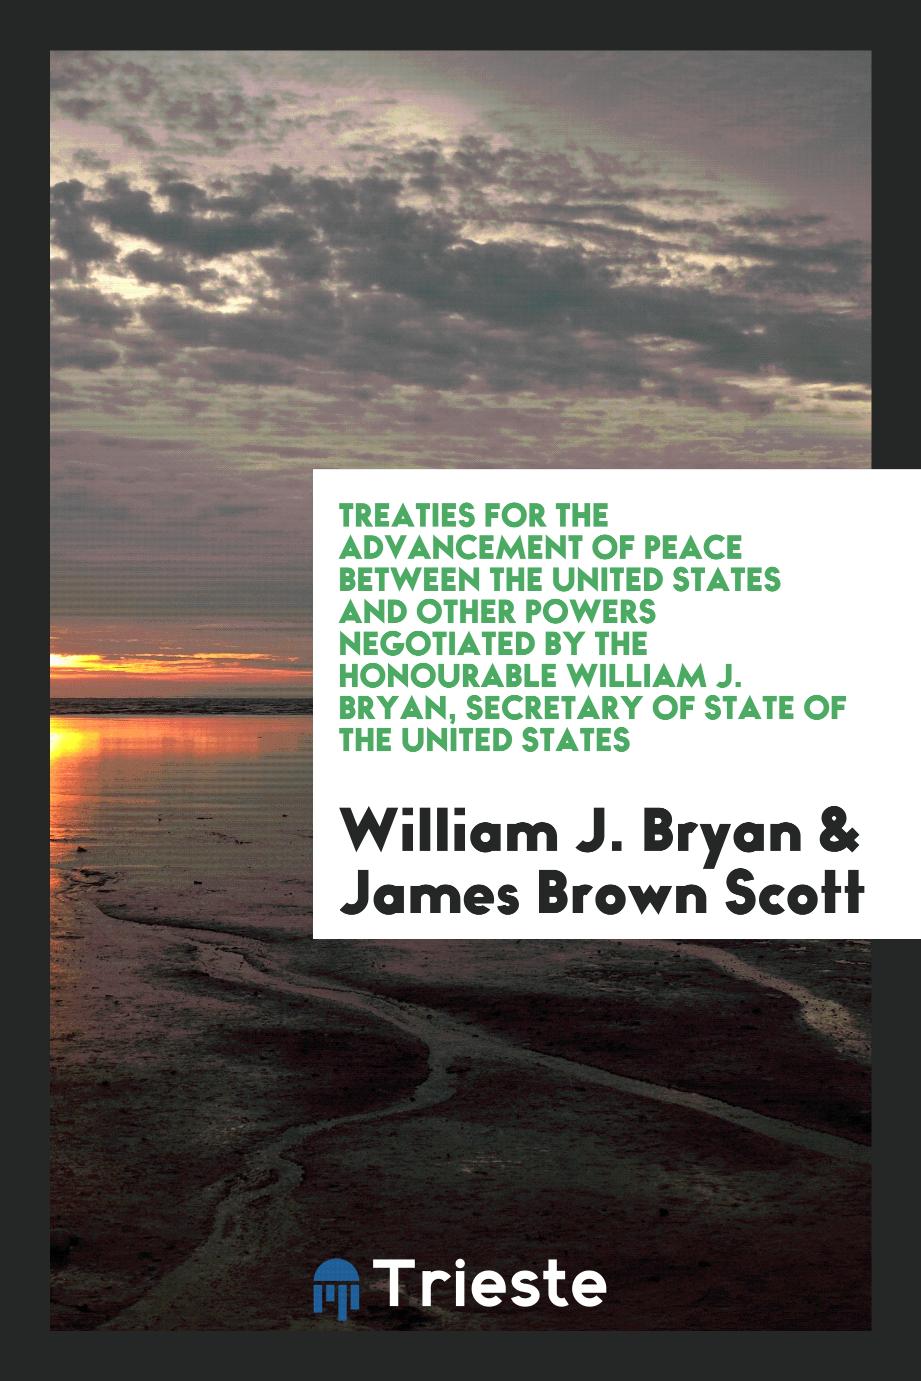 Treaties for the advancement of peace between the United States and other powers negotiated by the Honourable William J. Bryan, Secretary of state of the United States